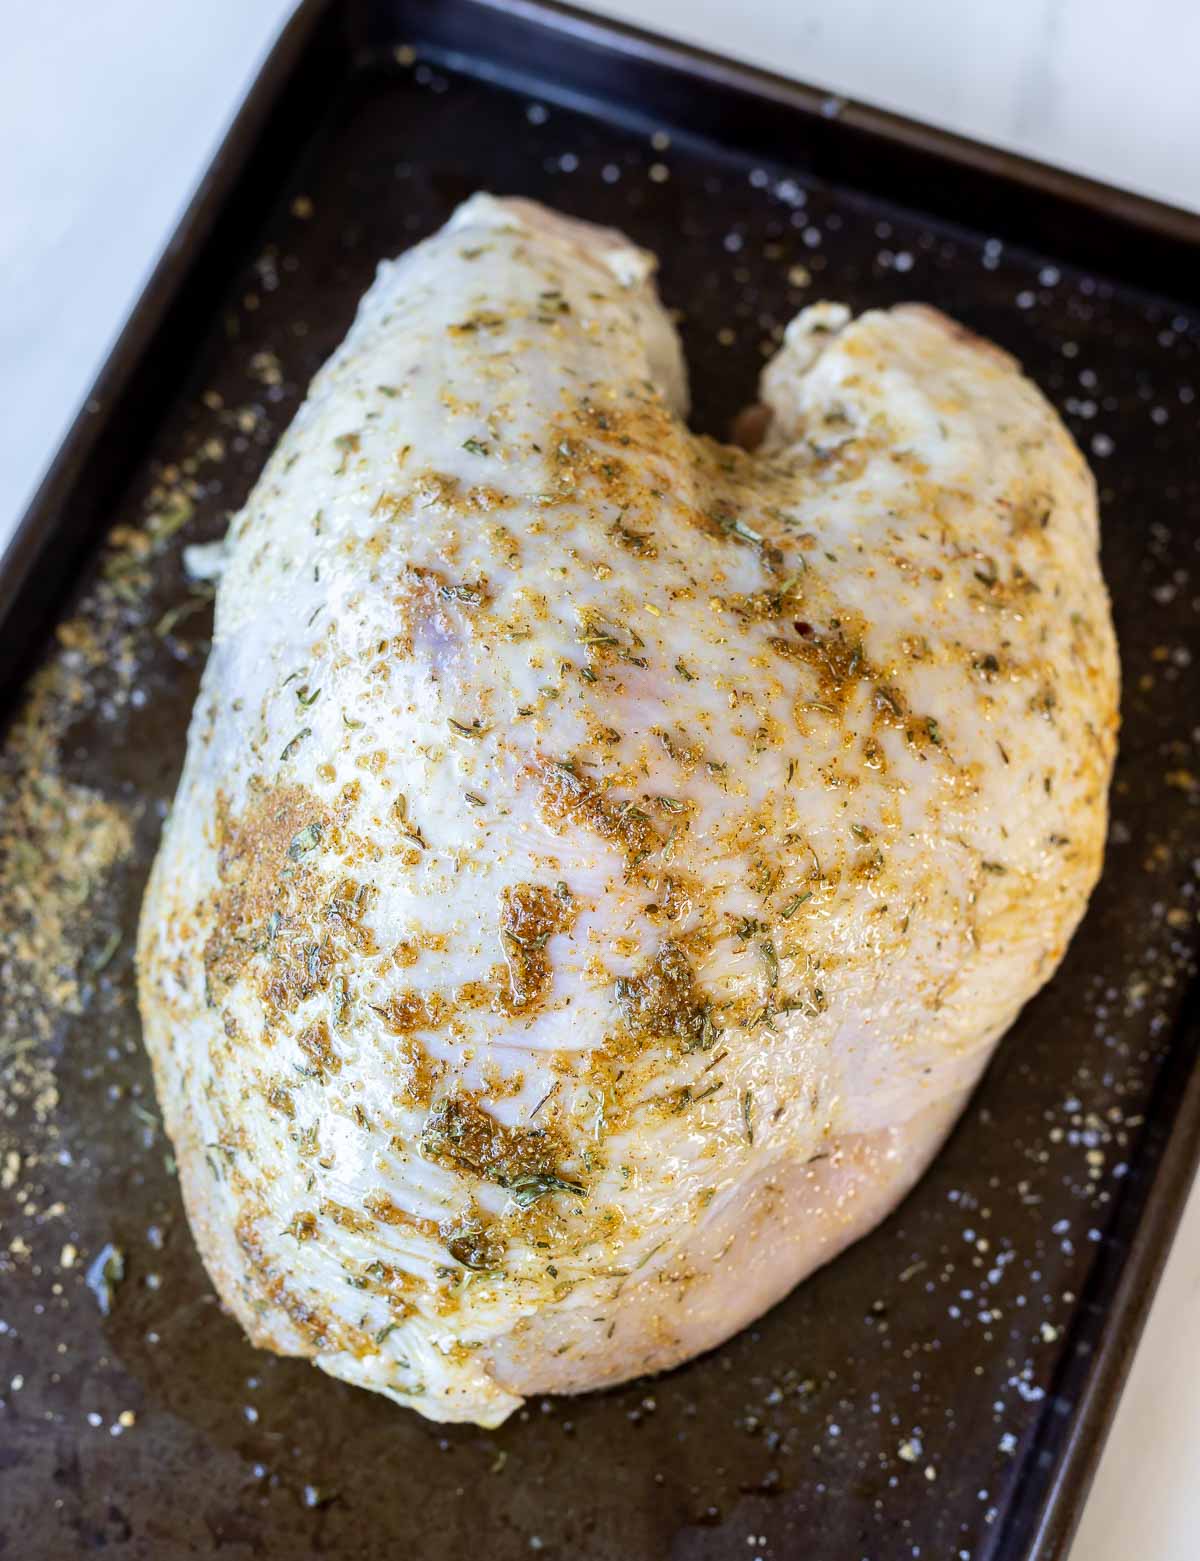 raw turkey breast coated in oil and herbs